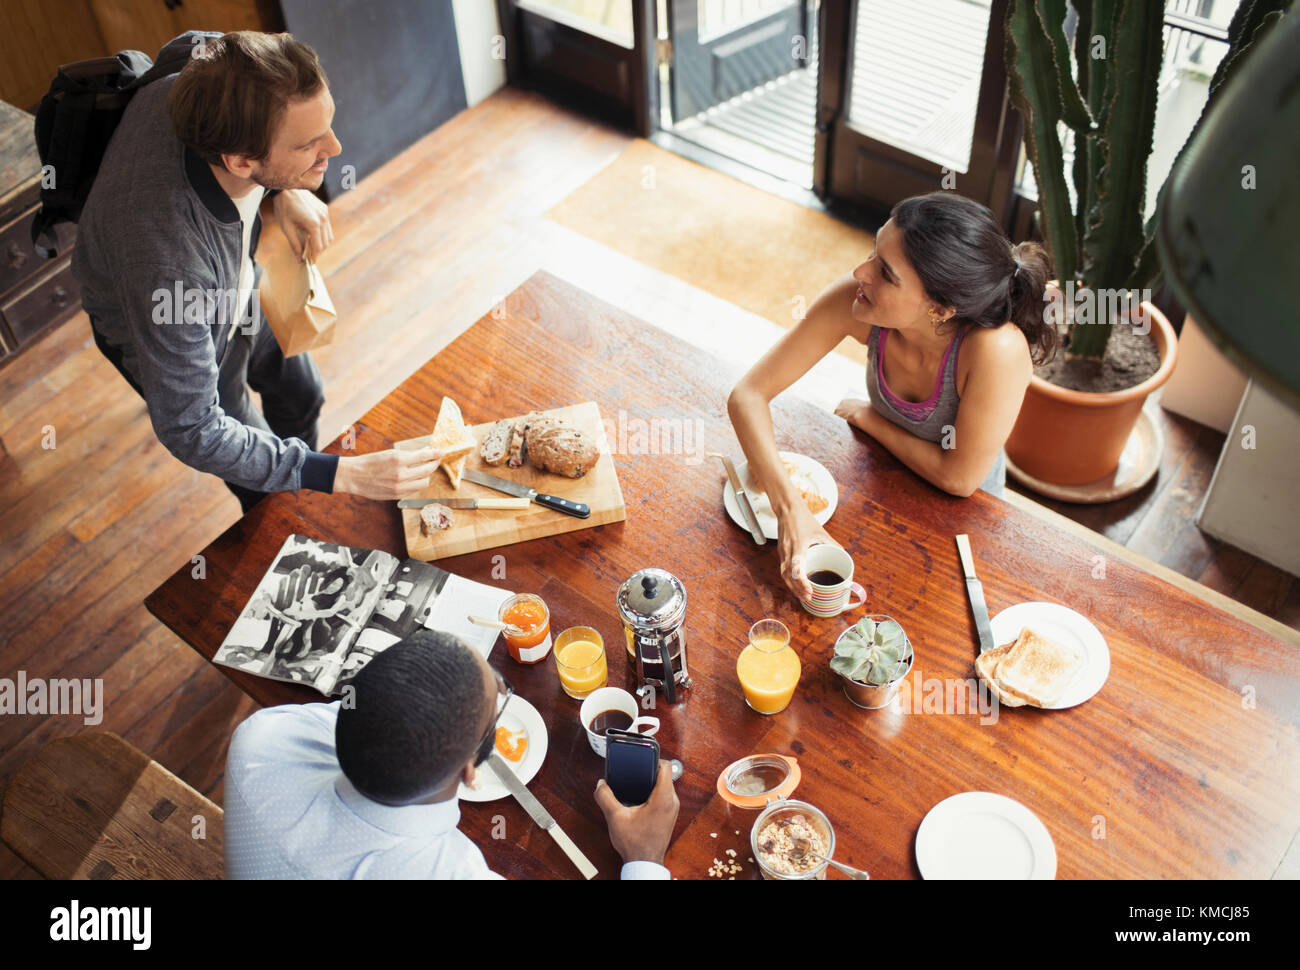 Friend roommates and eating breakfast and drinking coffee at table Stock Photo